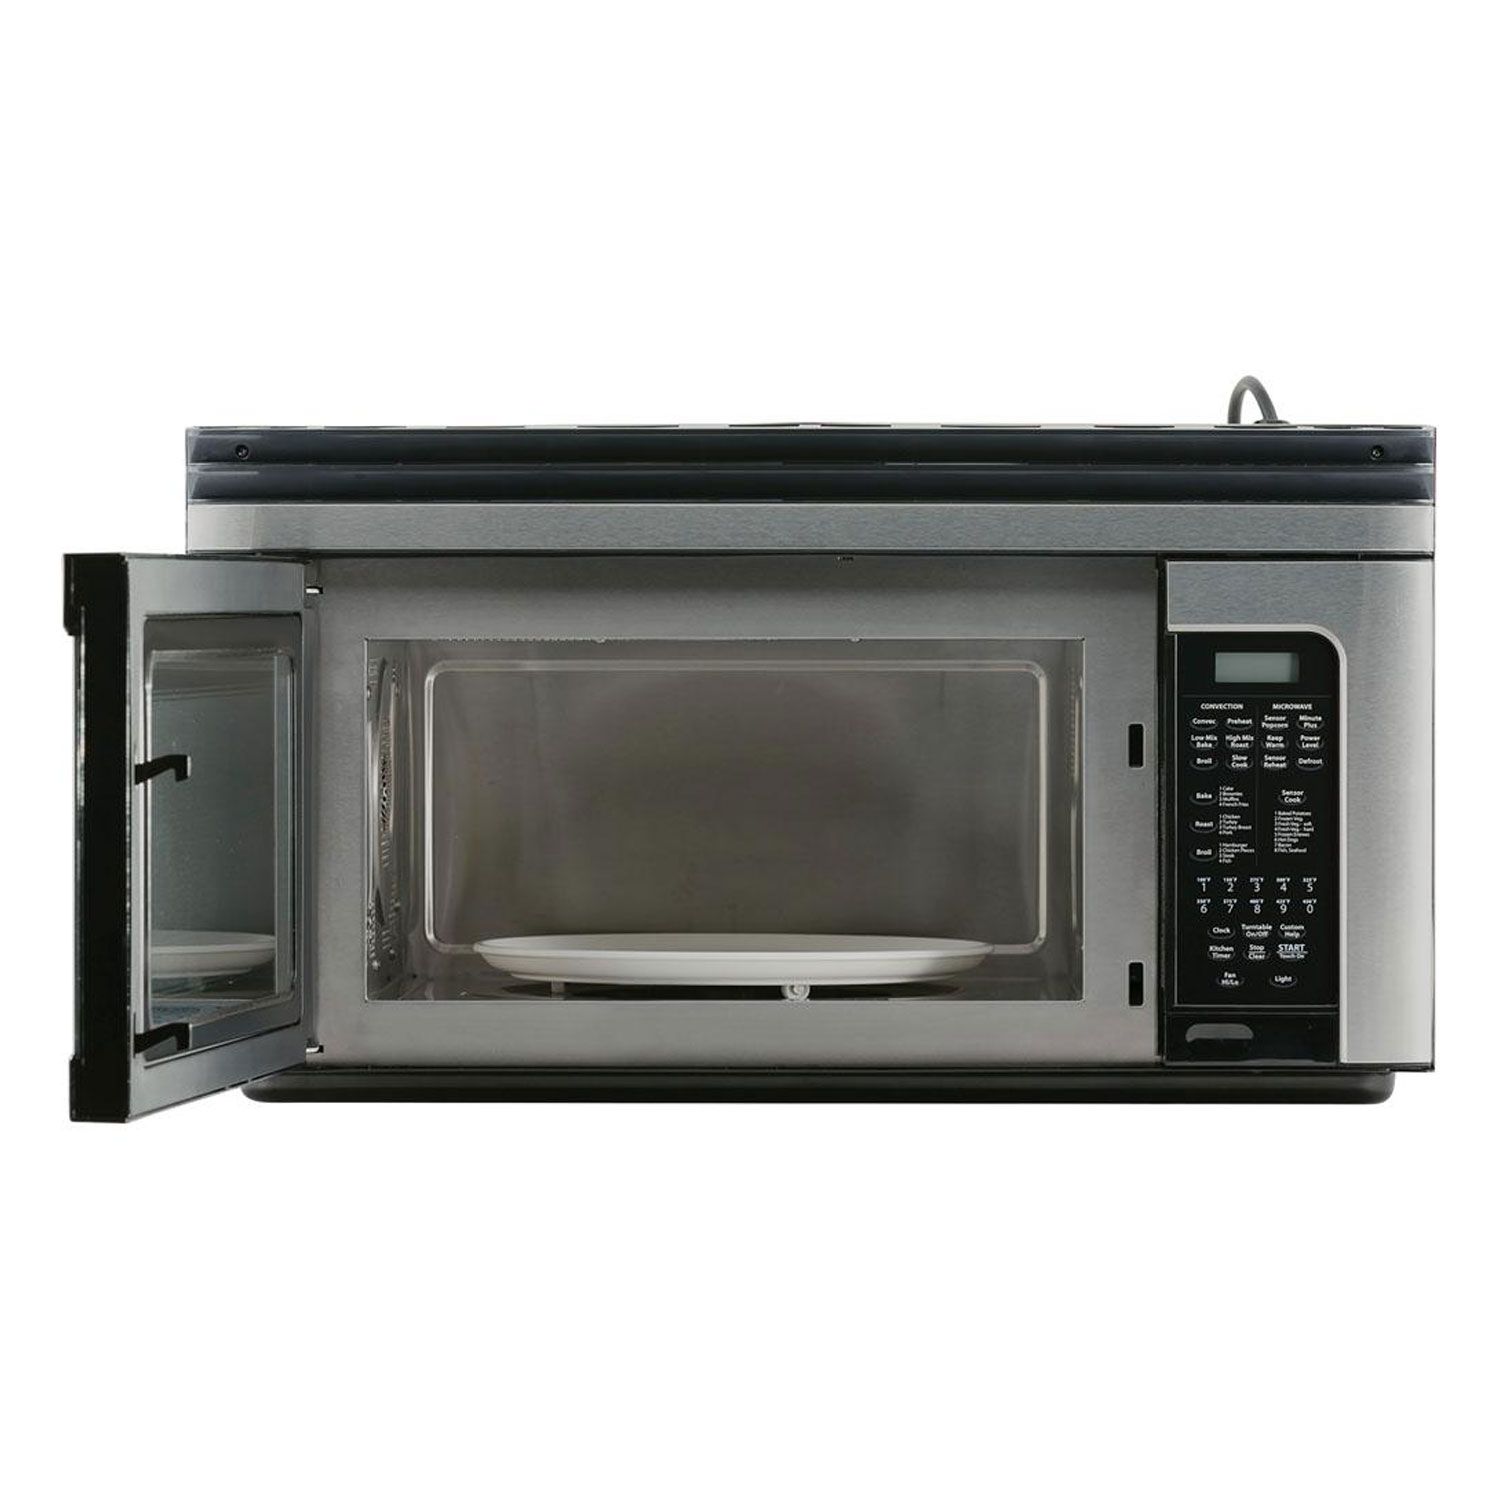 Sharp 1.1 Cubic Feet Convection Over the Range Microwave (Refurbished